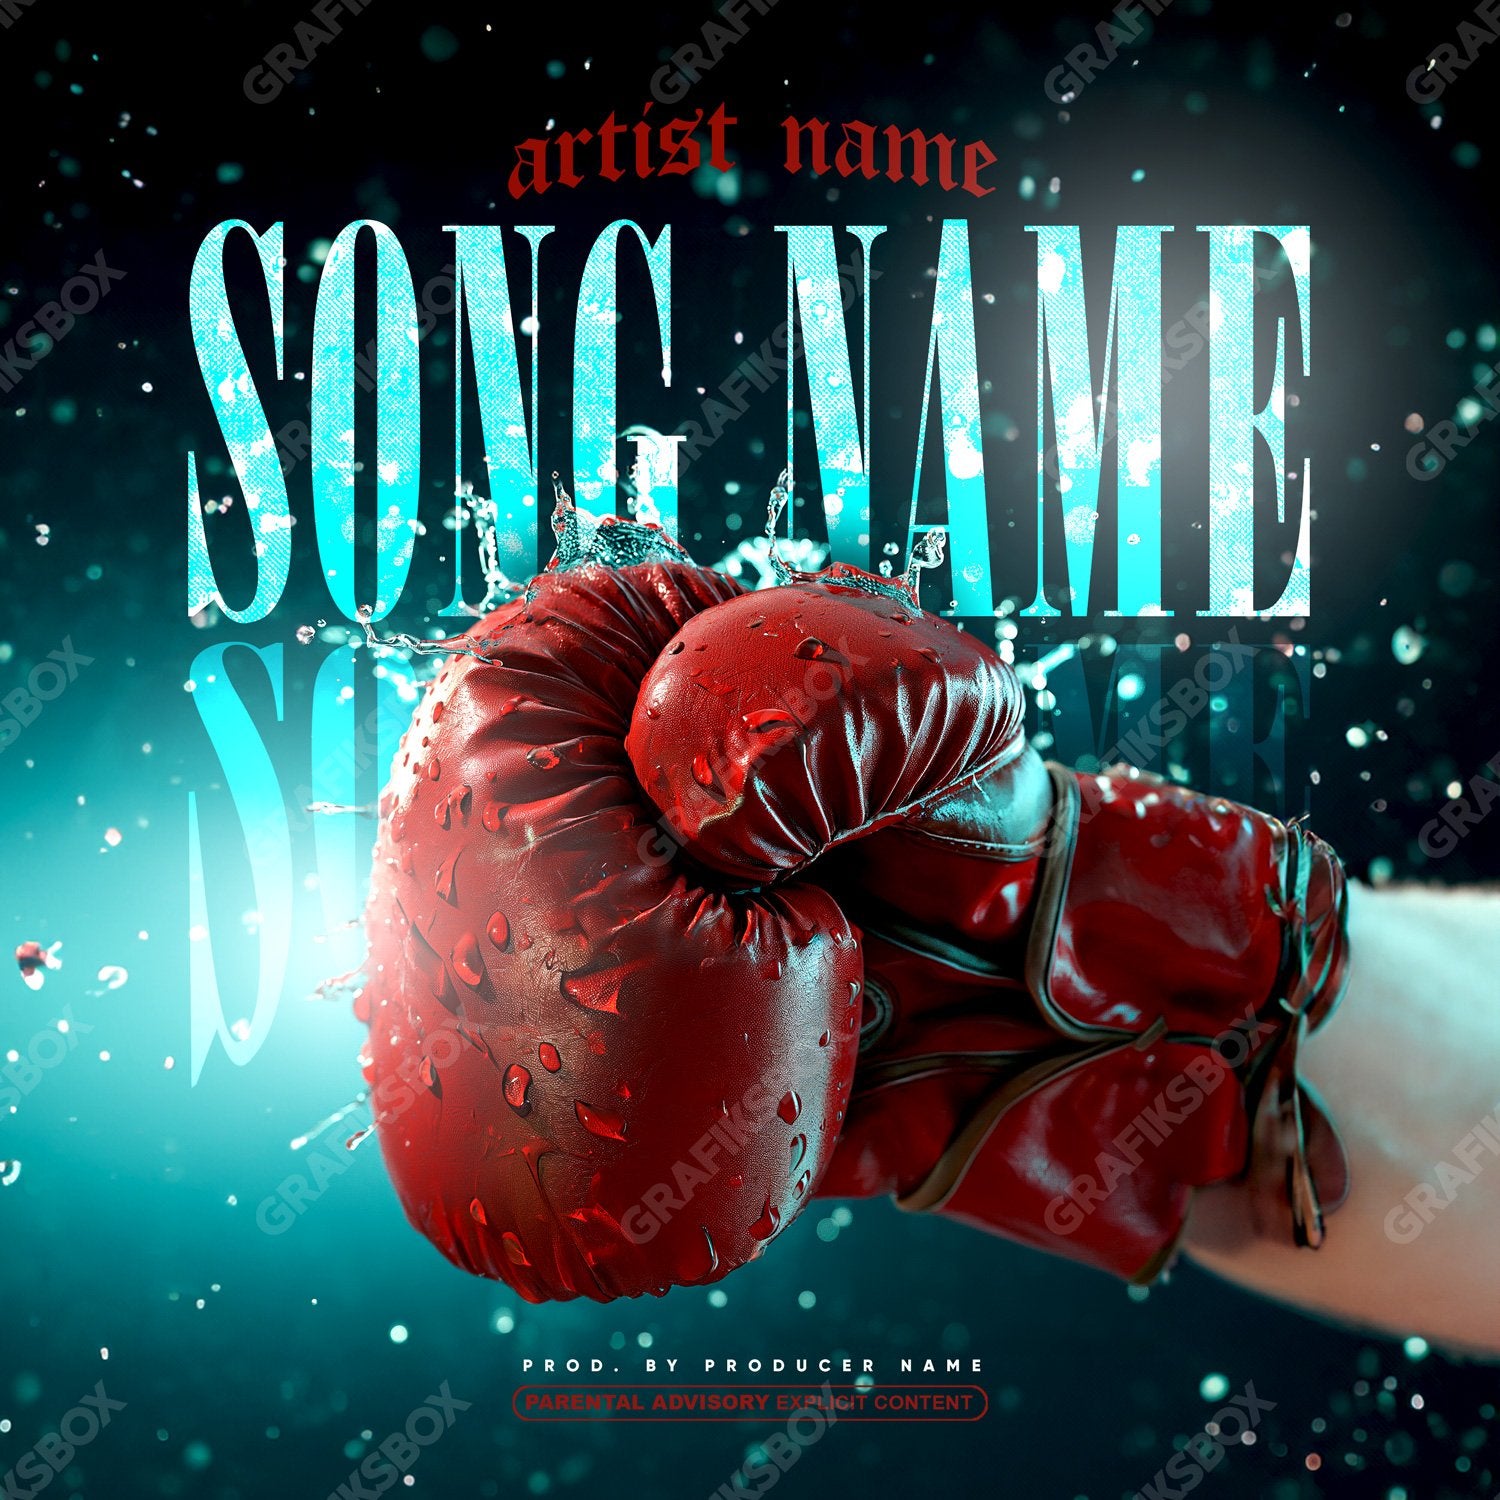 Punch premade cover art